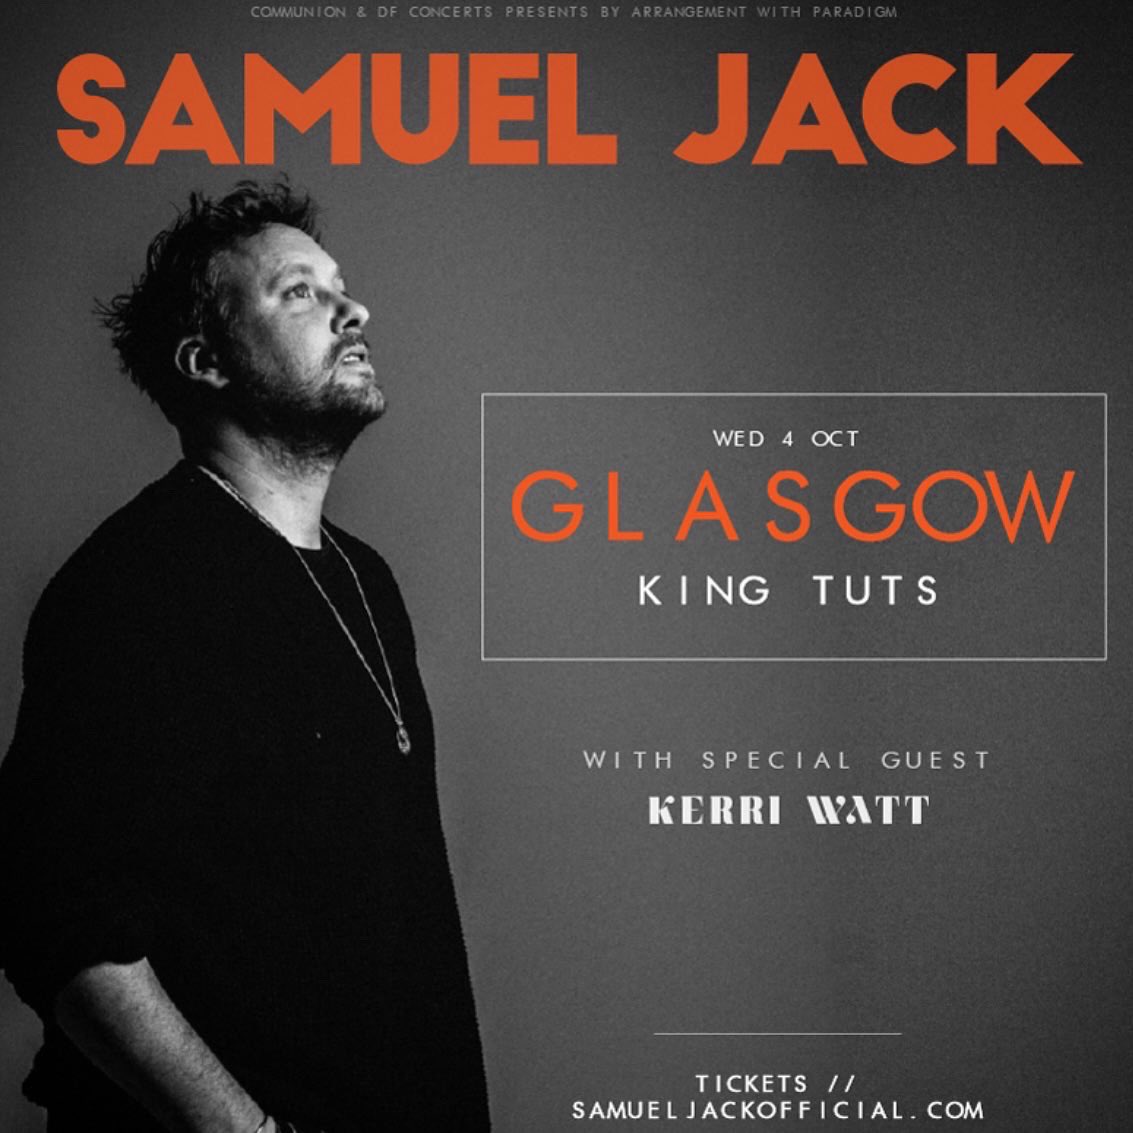 Glasgow show incoming! 🤩💃🏼 Excited to get back on stage at @kingtuts as special guest of my buddy Samuel Jack! Would love to see you there for my only show of 2022 with old songs and new - tickets on sale now ⚡️ ticketweb.uk/event/samuel-j…